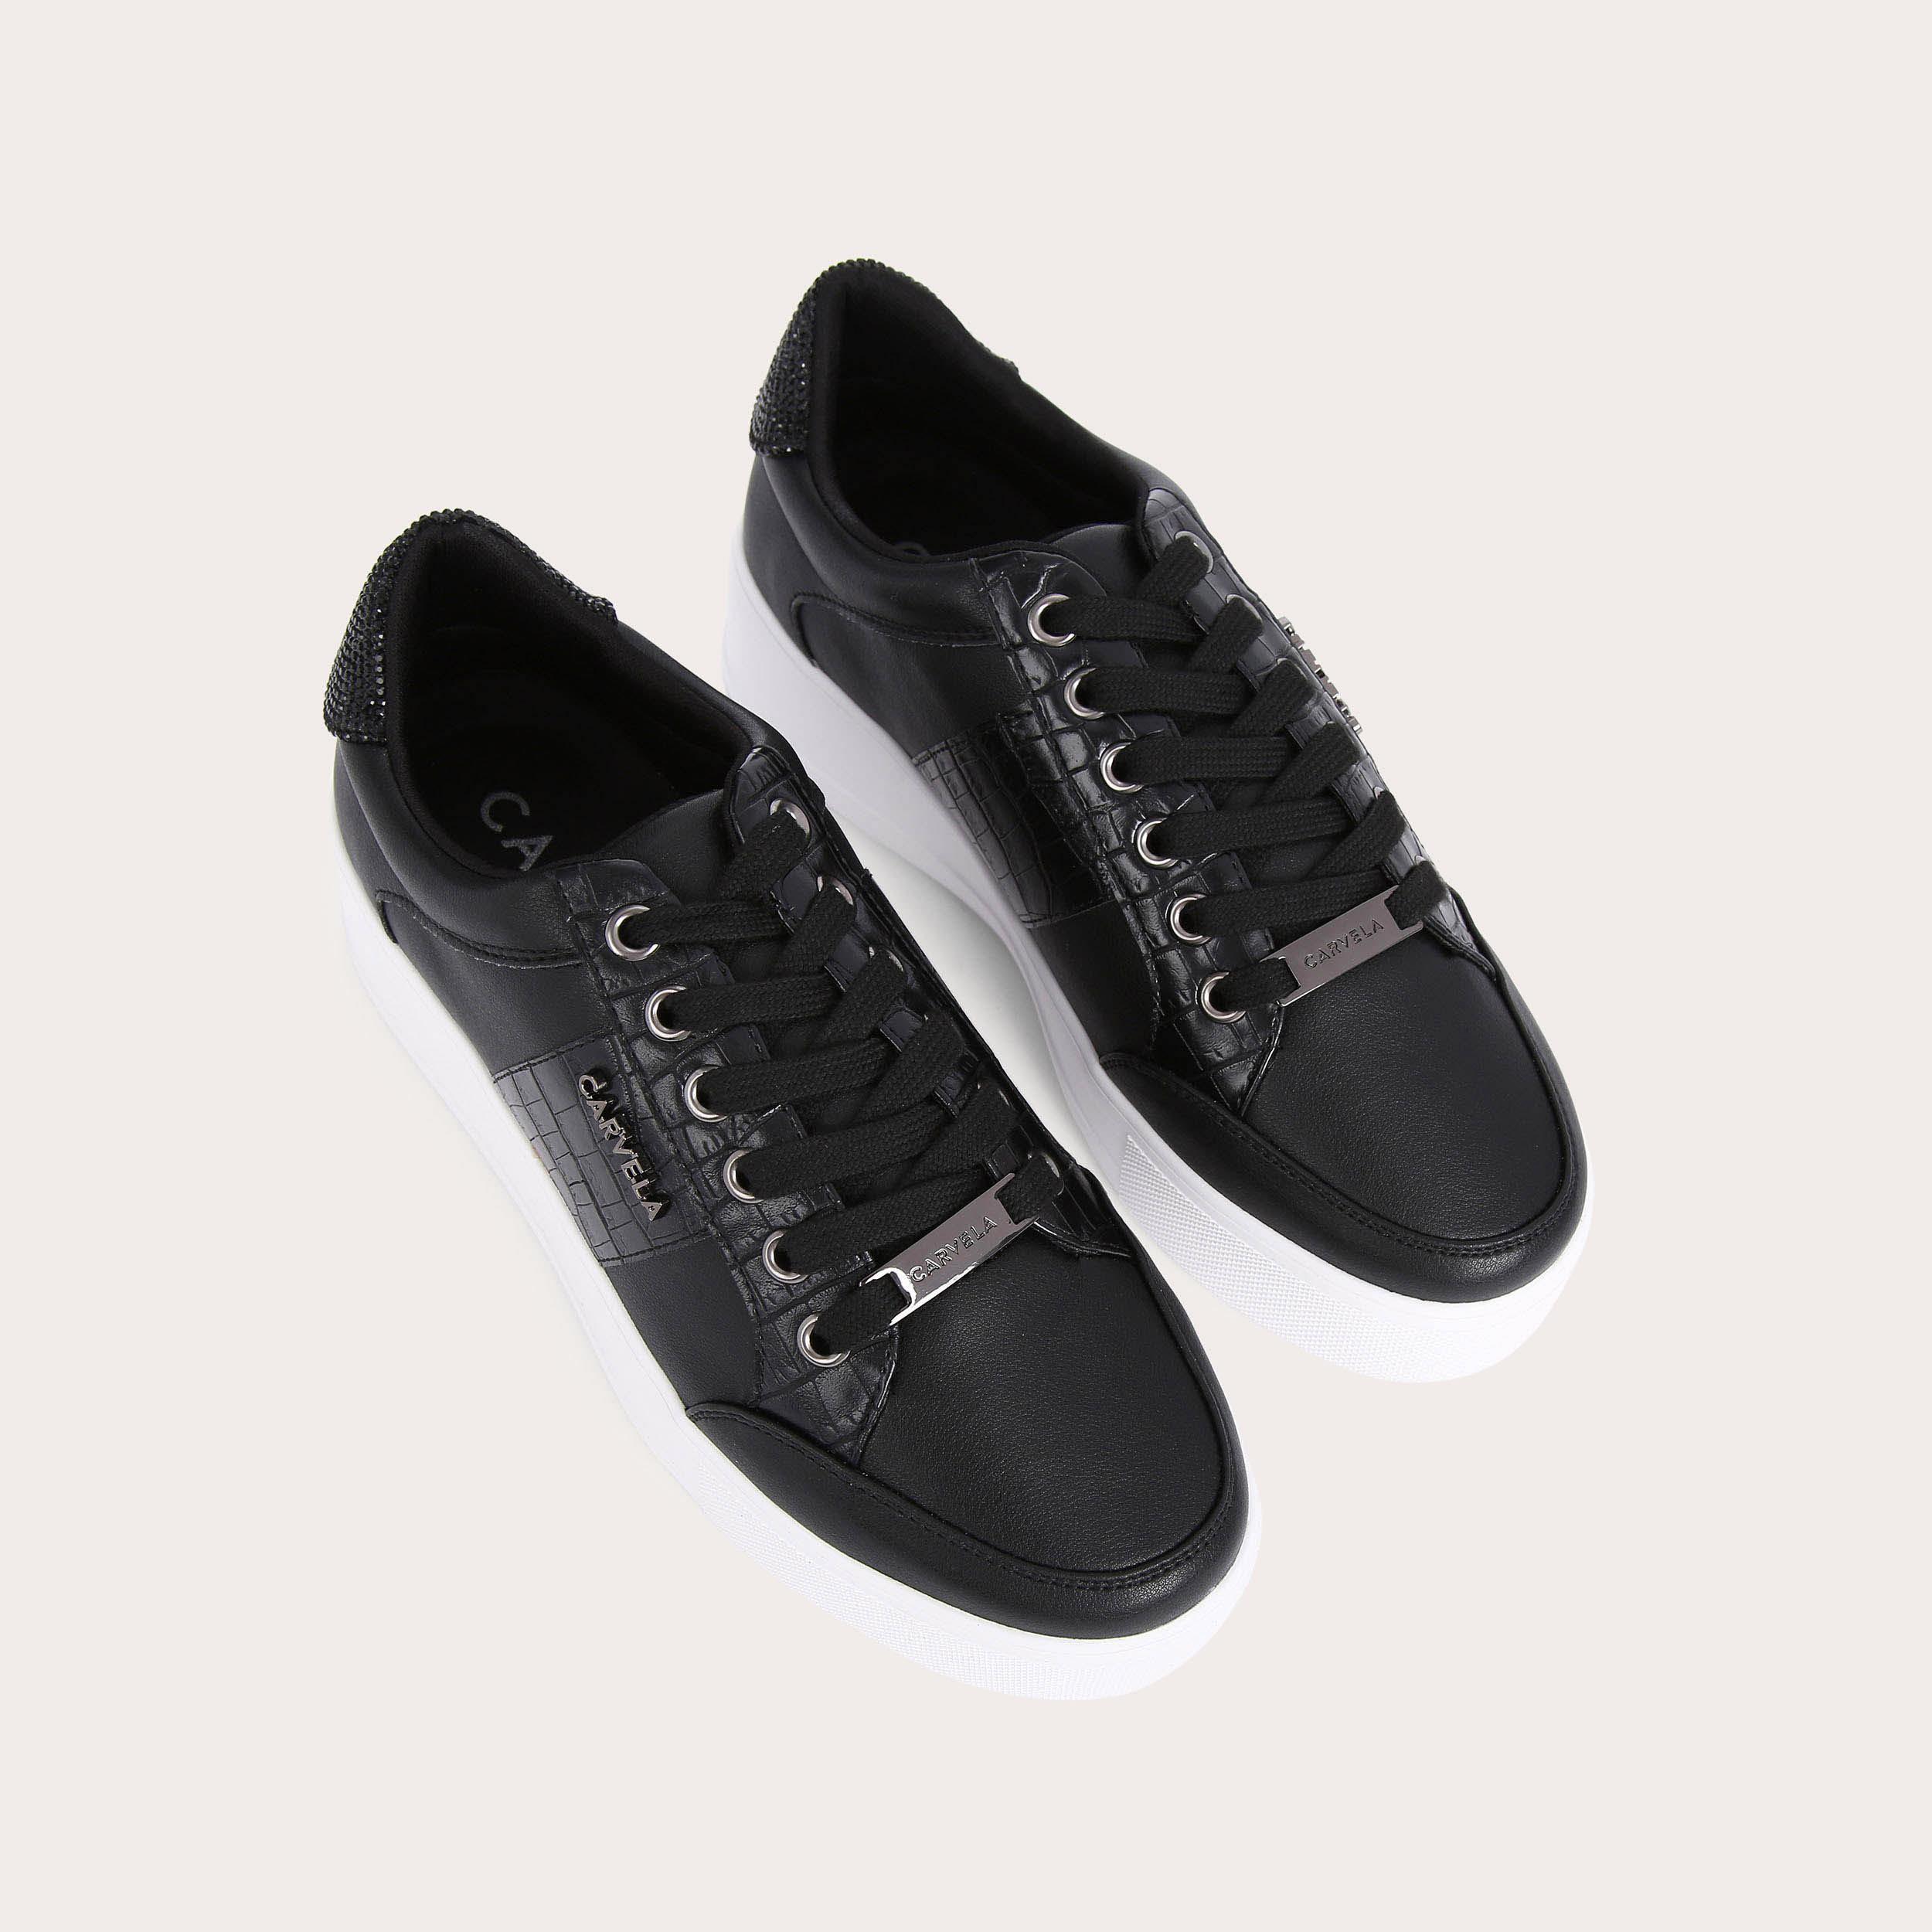 JIVE LACE UP Black Croc Embossed Crystal Lace Up Trainers by CARVELA